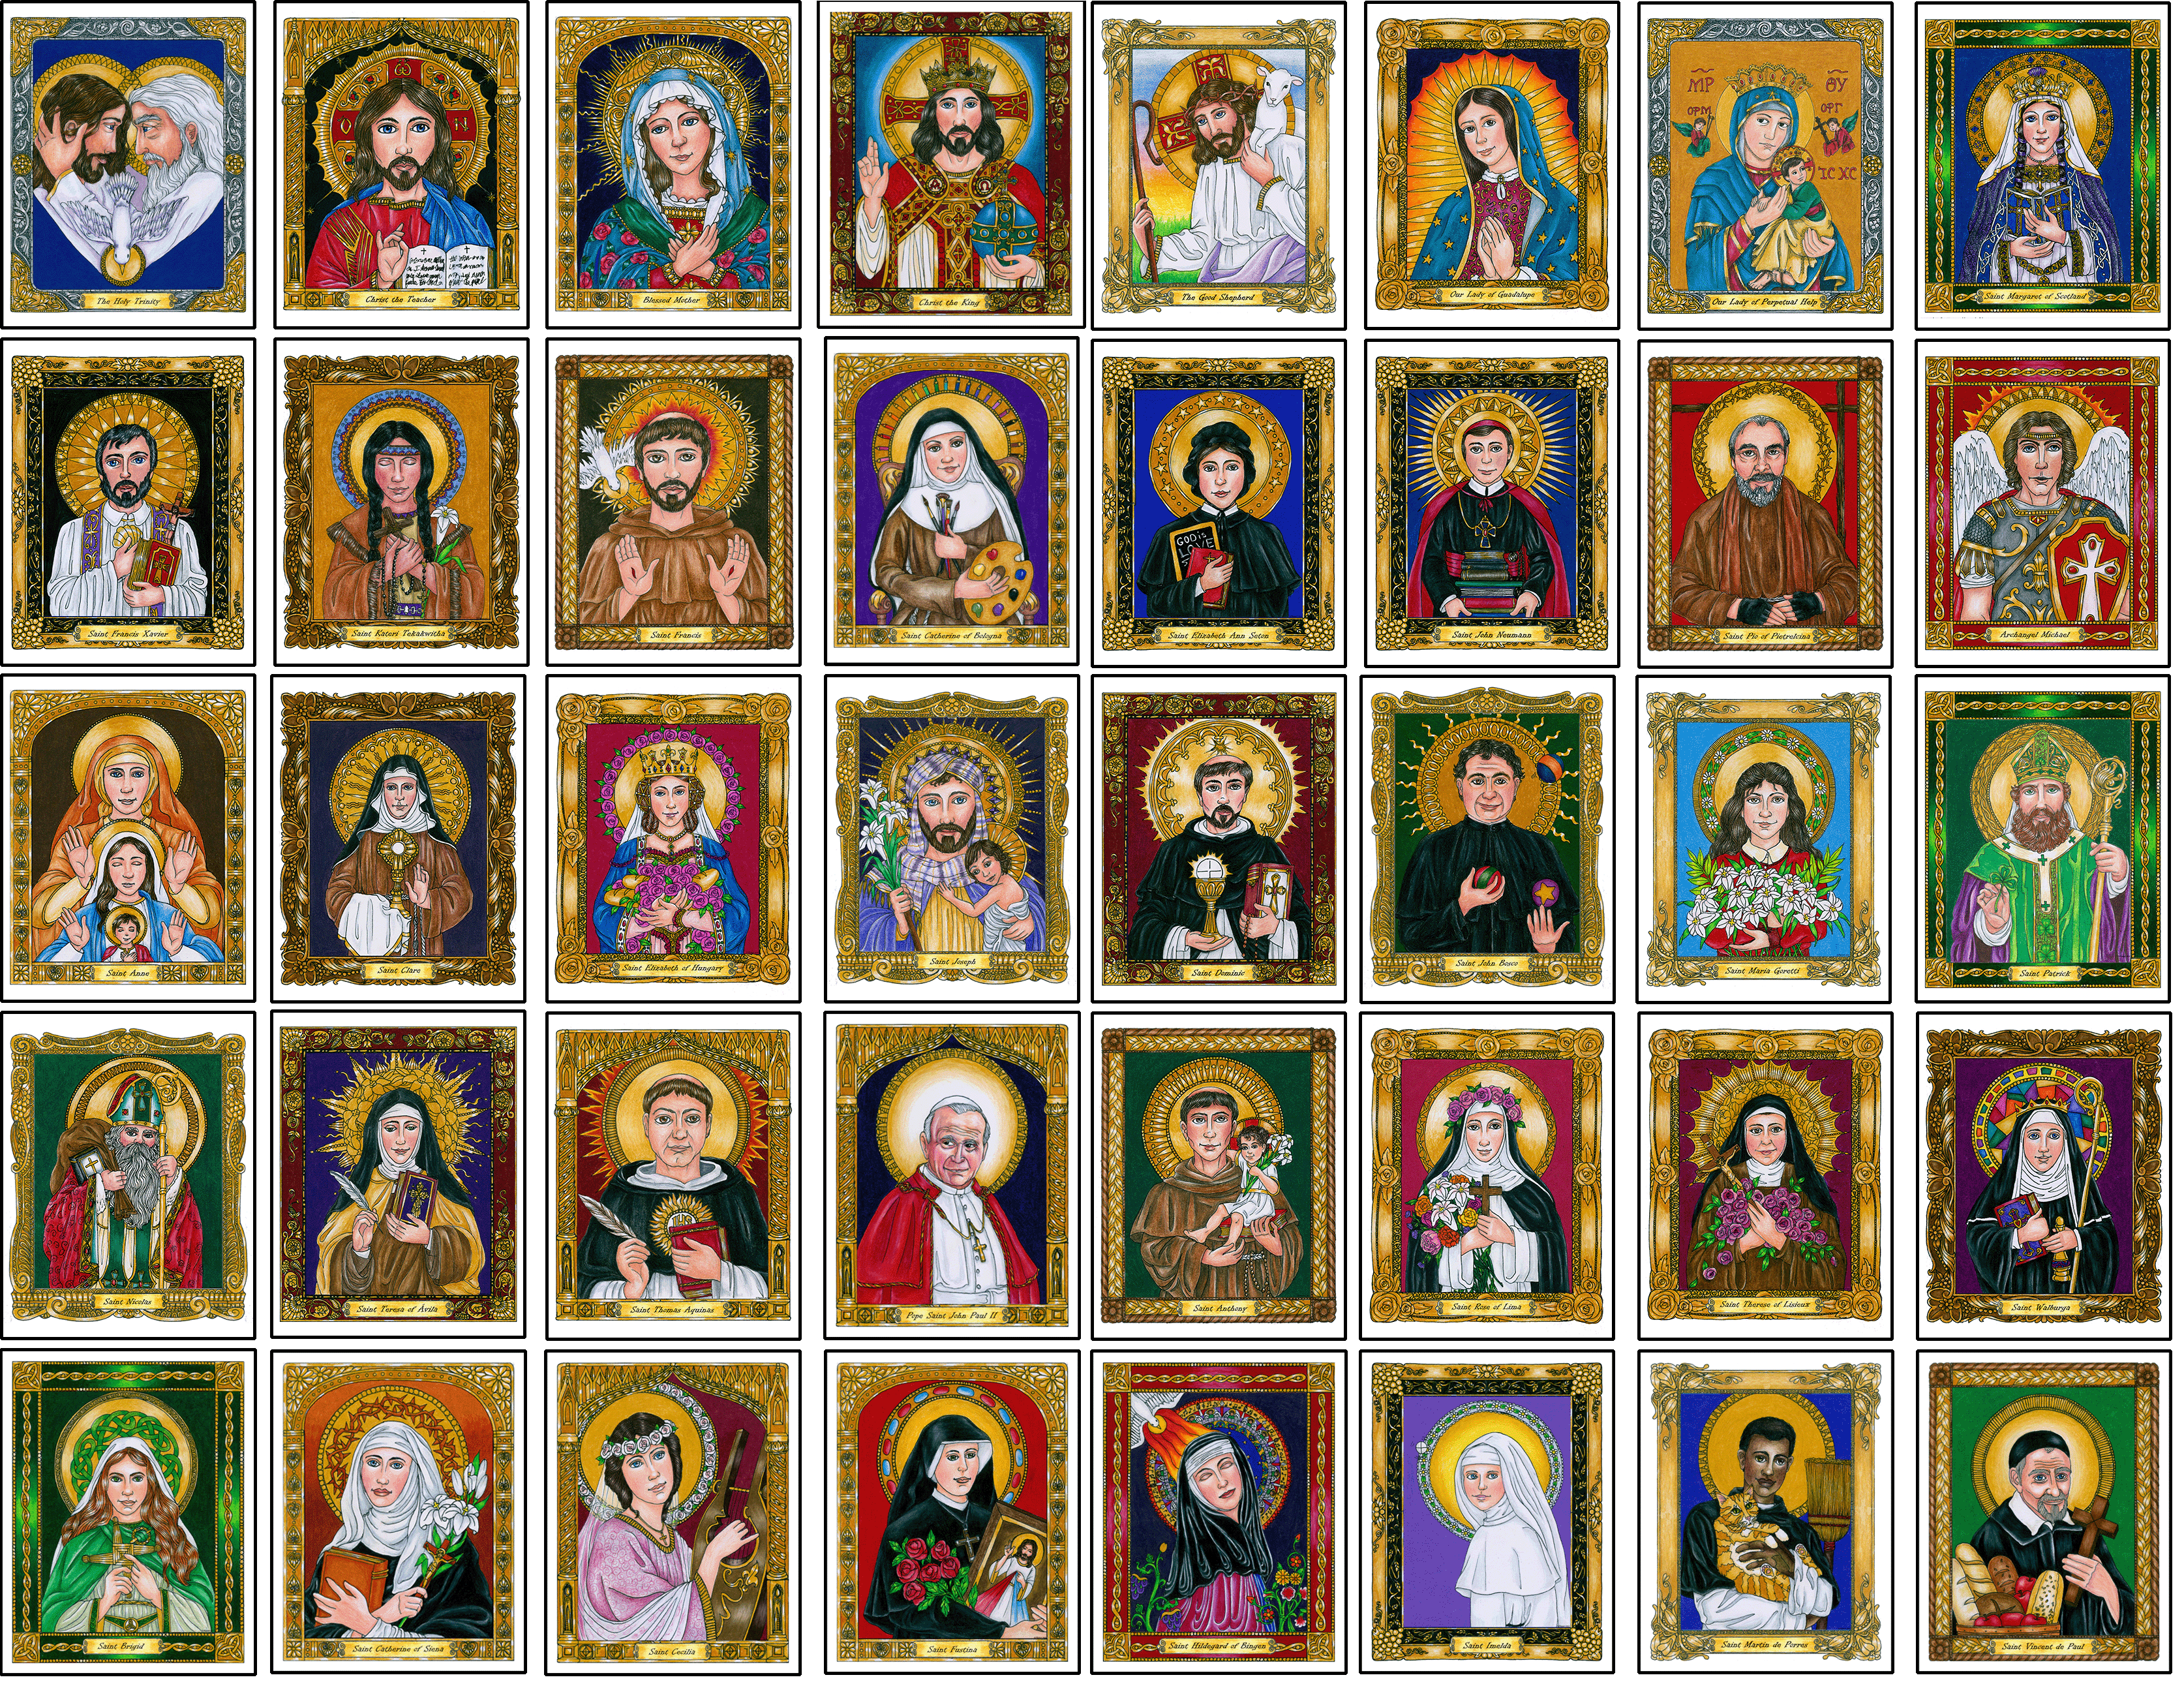 Gallery of Saints Holy Cards